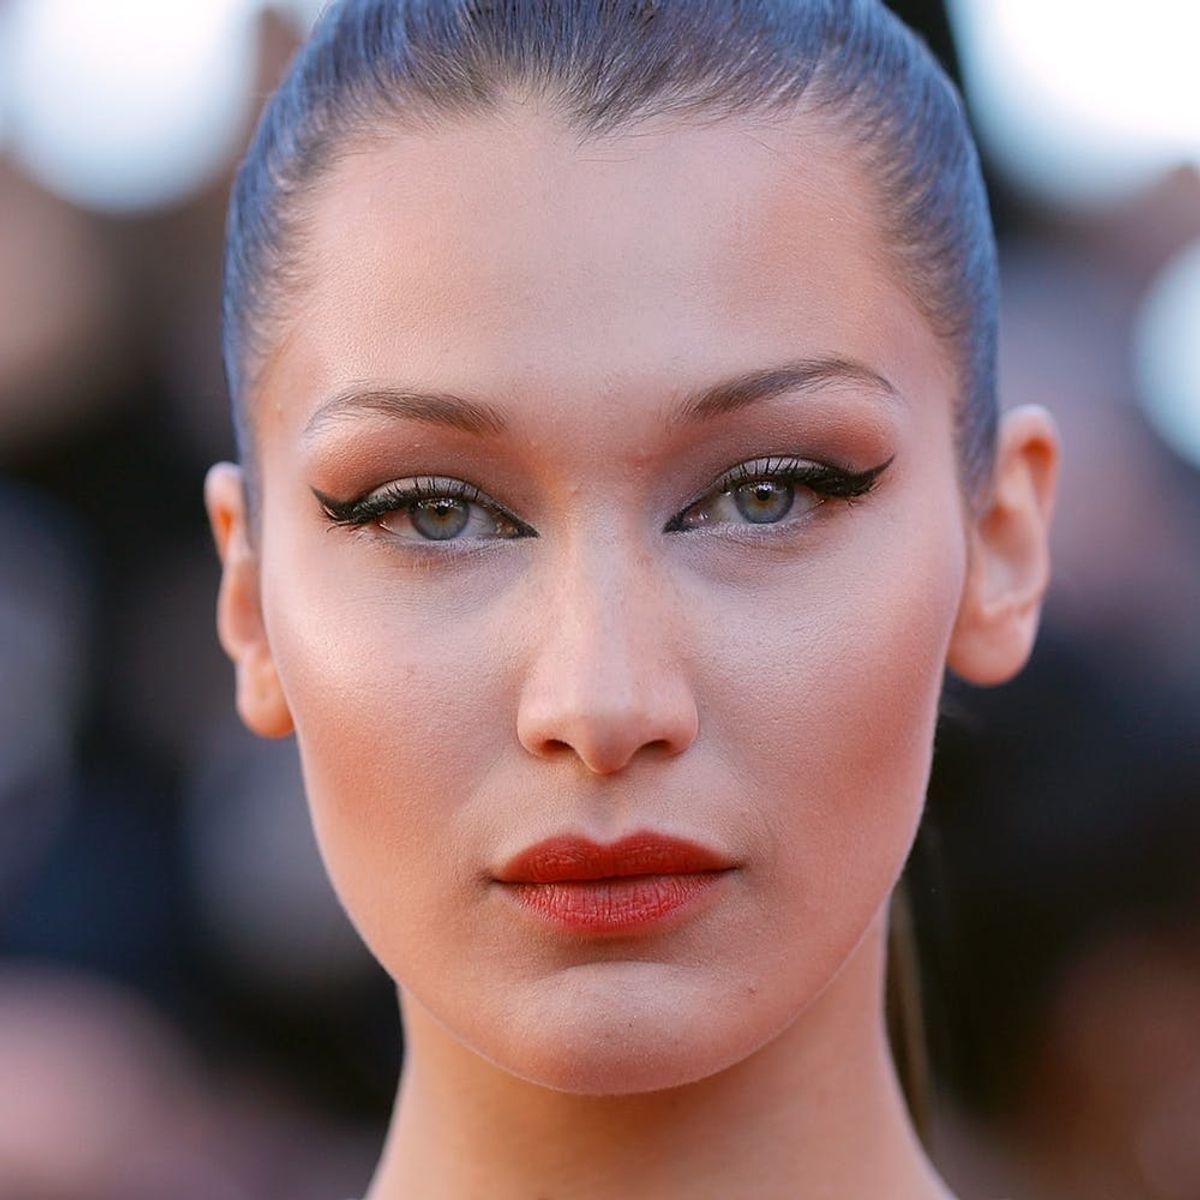 Bella Hadid Is Taking Over for Blake Lively As This Year’s Queen of Cannes Style